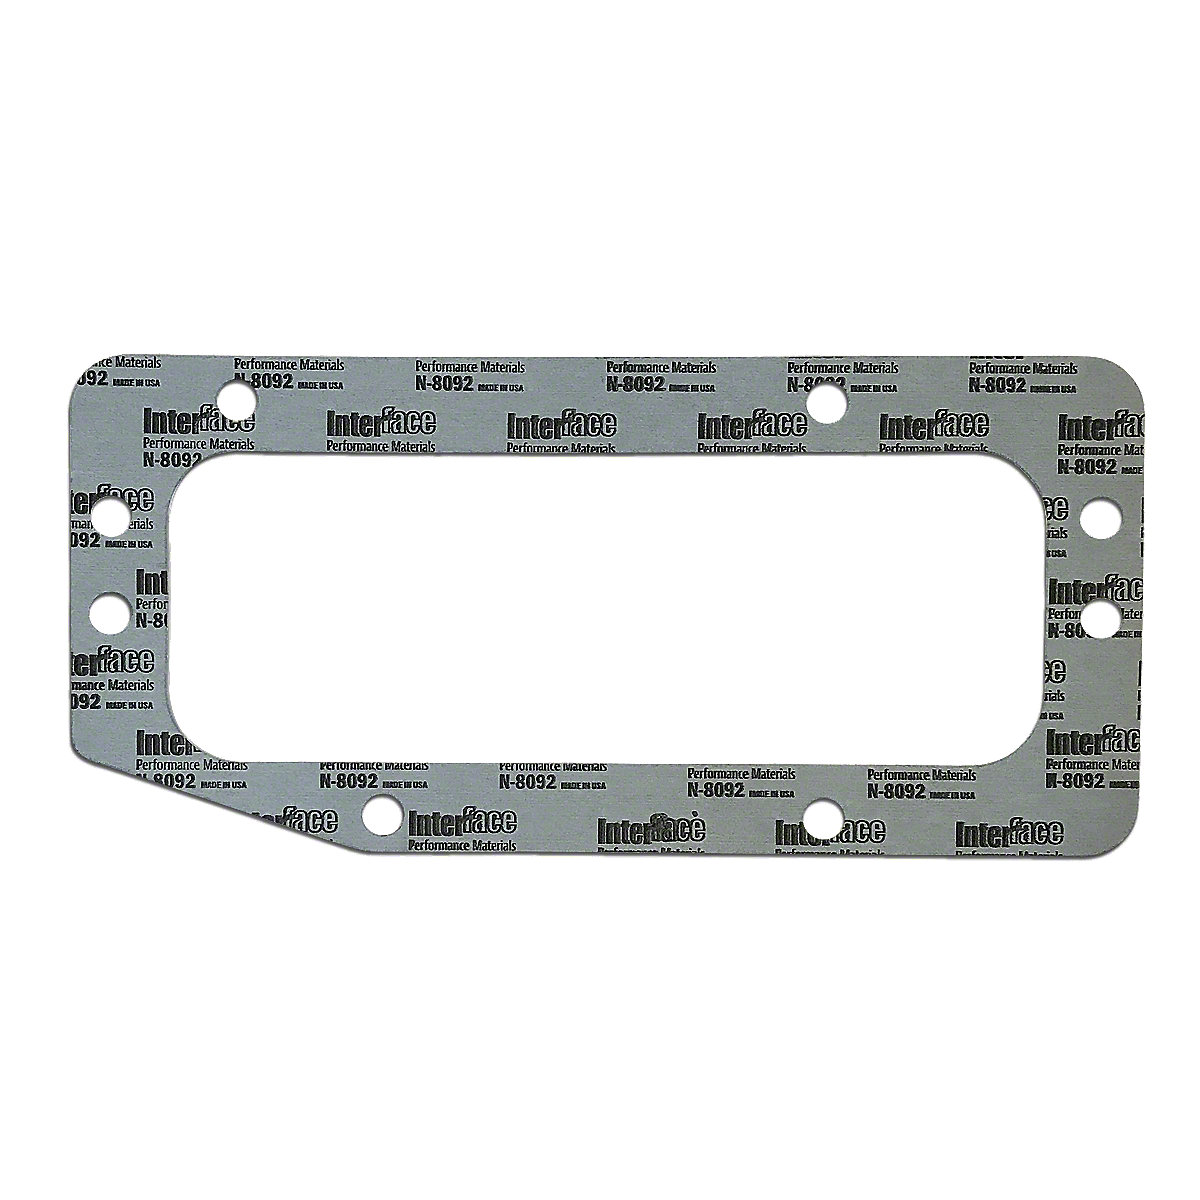 Pulley Drive Opening Cover Gasket